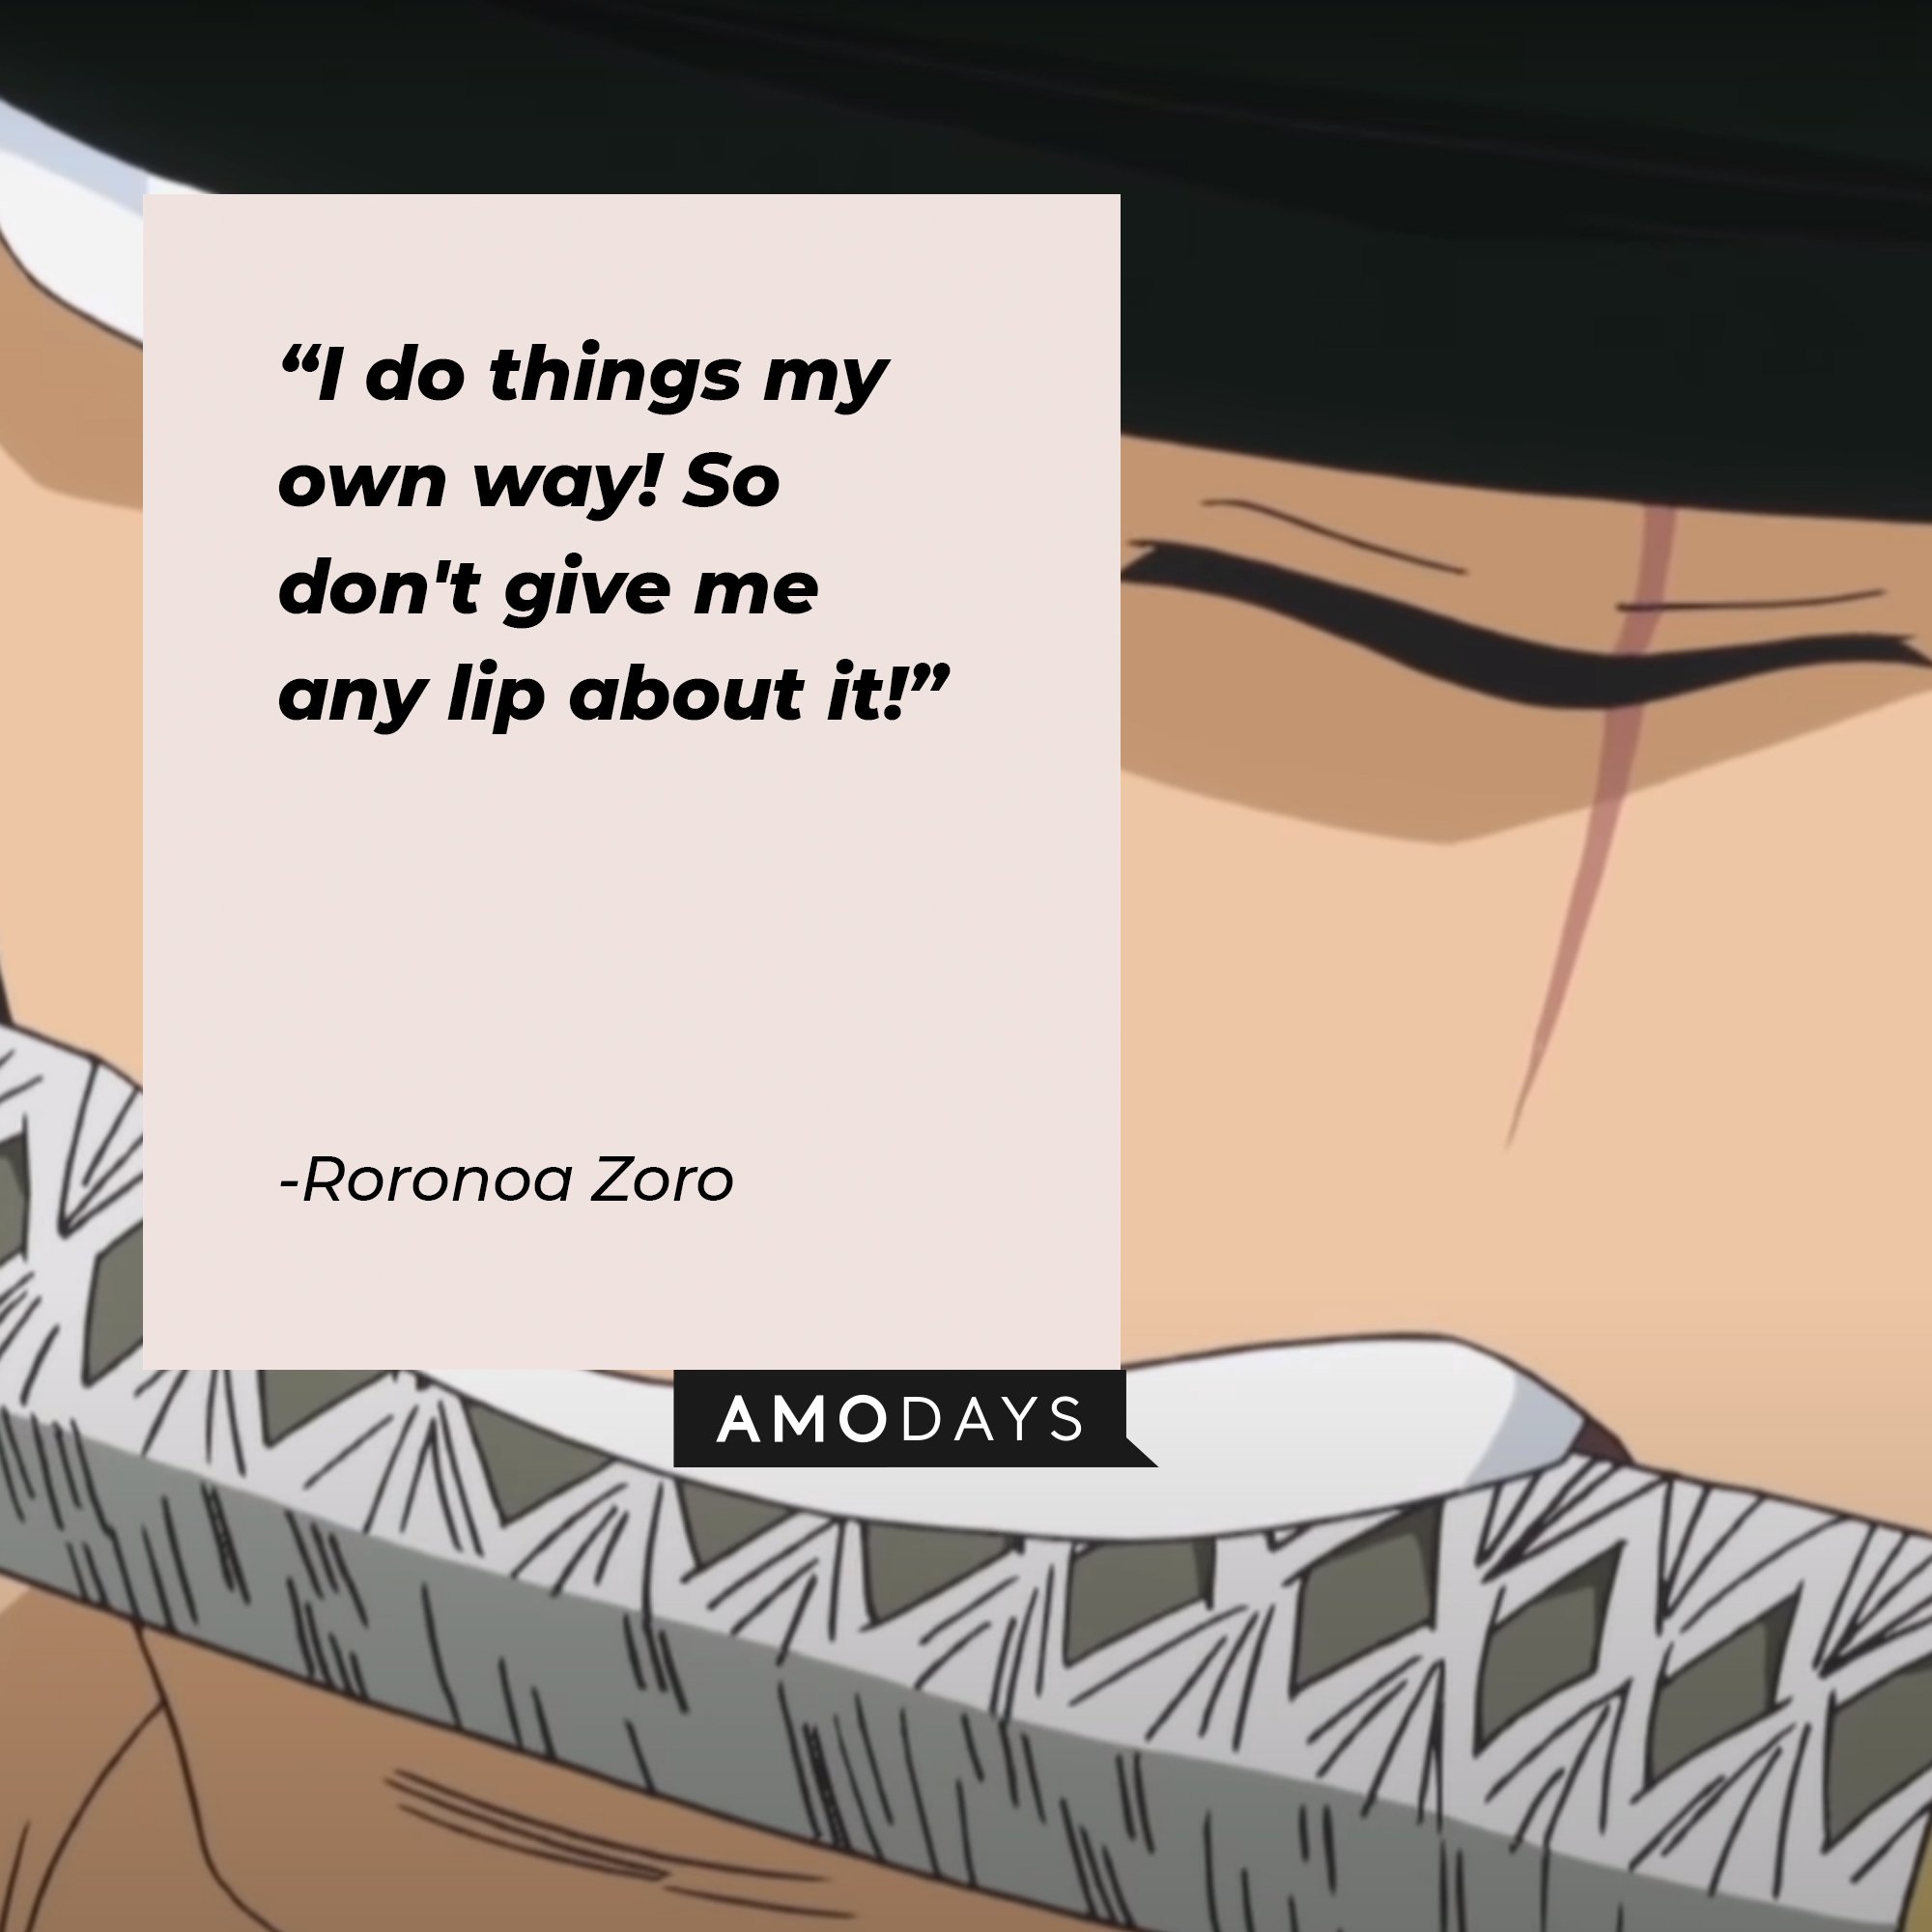 Roronoa Zoro’s quote: "I do things my own way! So don't give me any lip about it!” | Image: AmoDays